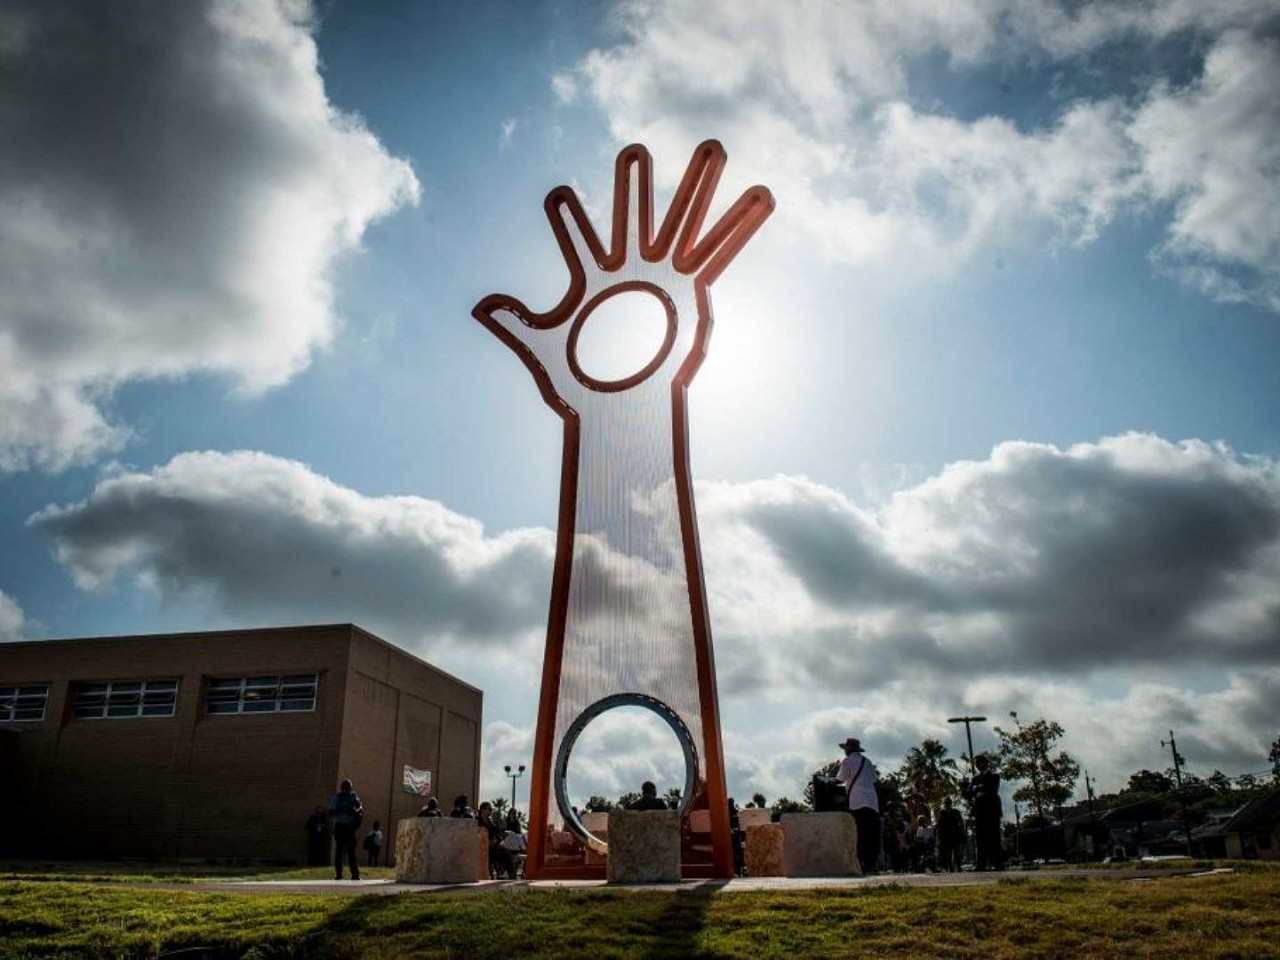 Open Hand, Open Mind, Open Heart
1101 Iowa St.
Artist: Douglas Kornfeld
Inspired by Dr. Martin Luther King Jr.’s message of nonviolence, this 32-foot tall sculpture in Sullivan Park faces San Antonio's downtown skyline.